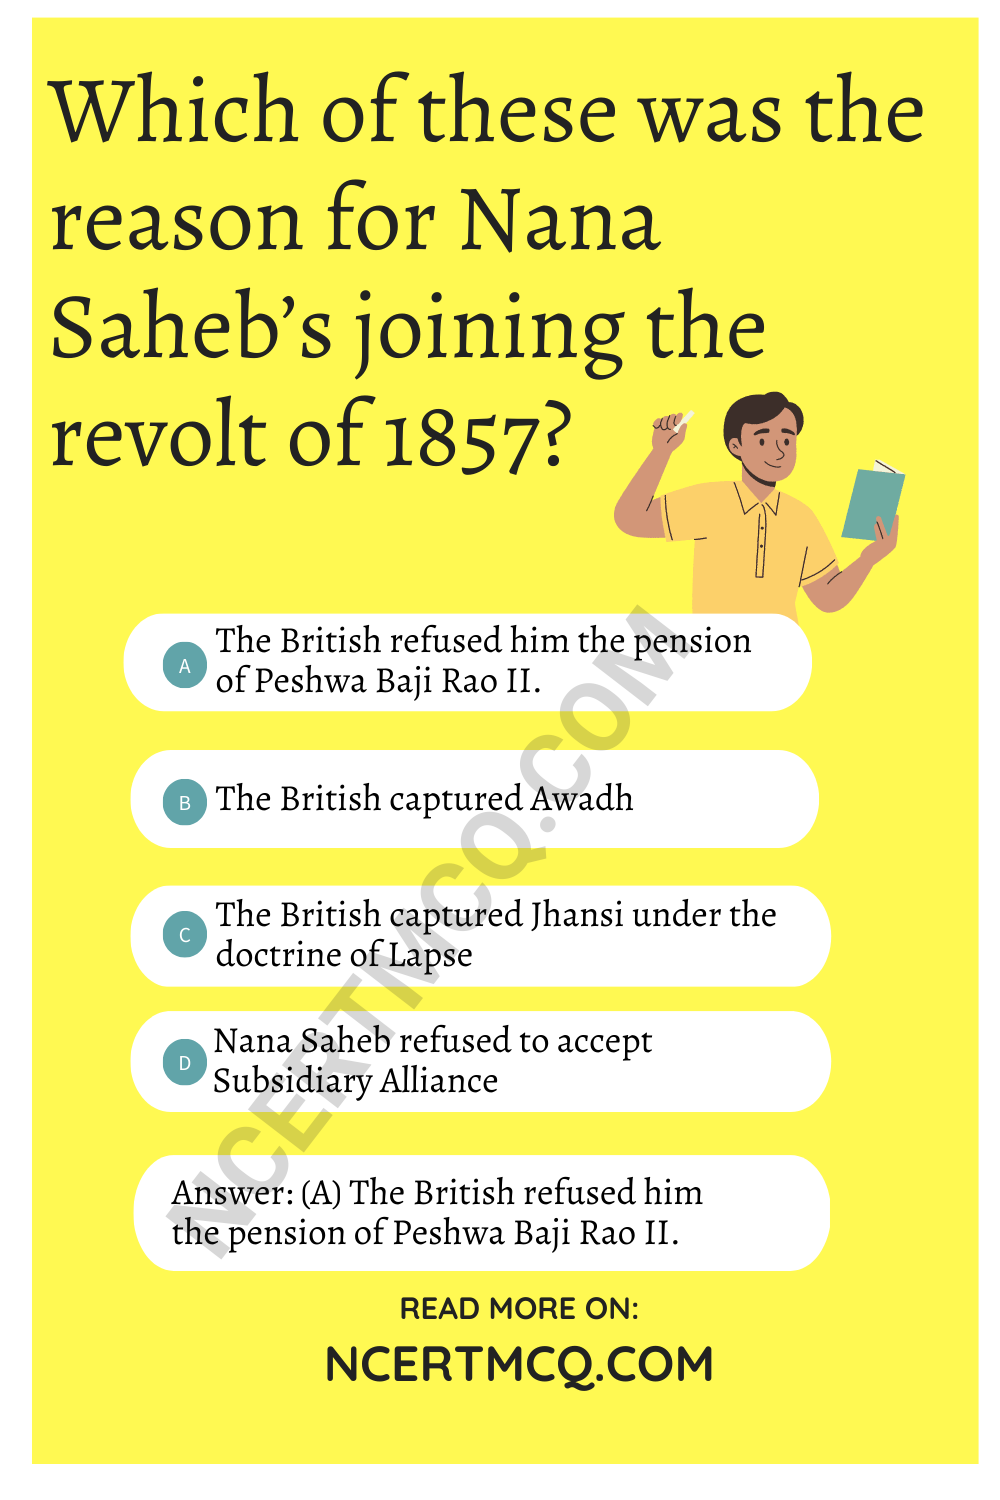 Which of these was the reason for Nana Saheb’s joining the revolt of 1857?